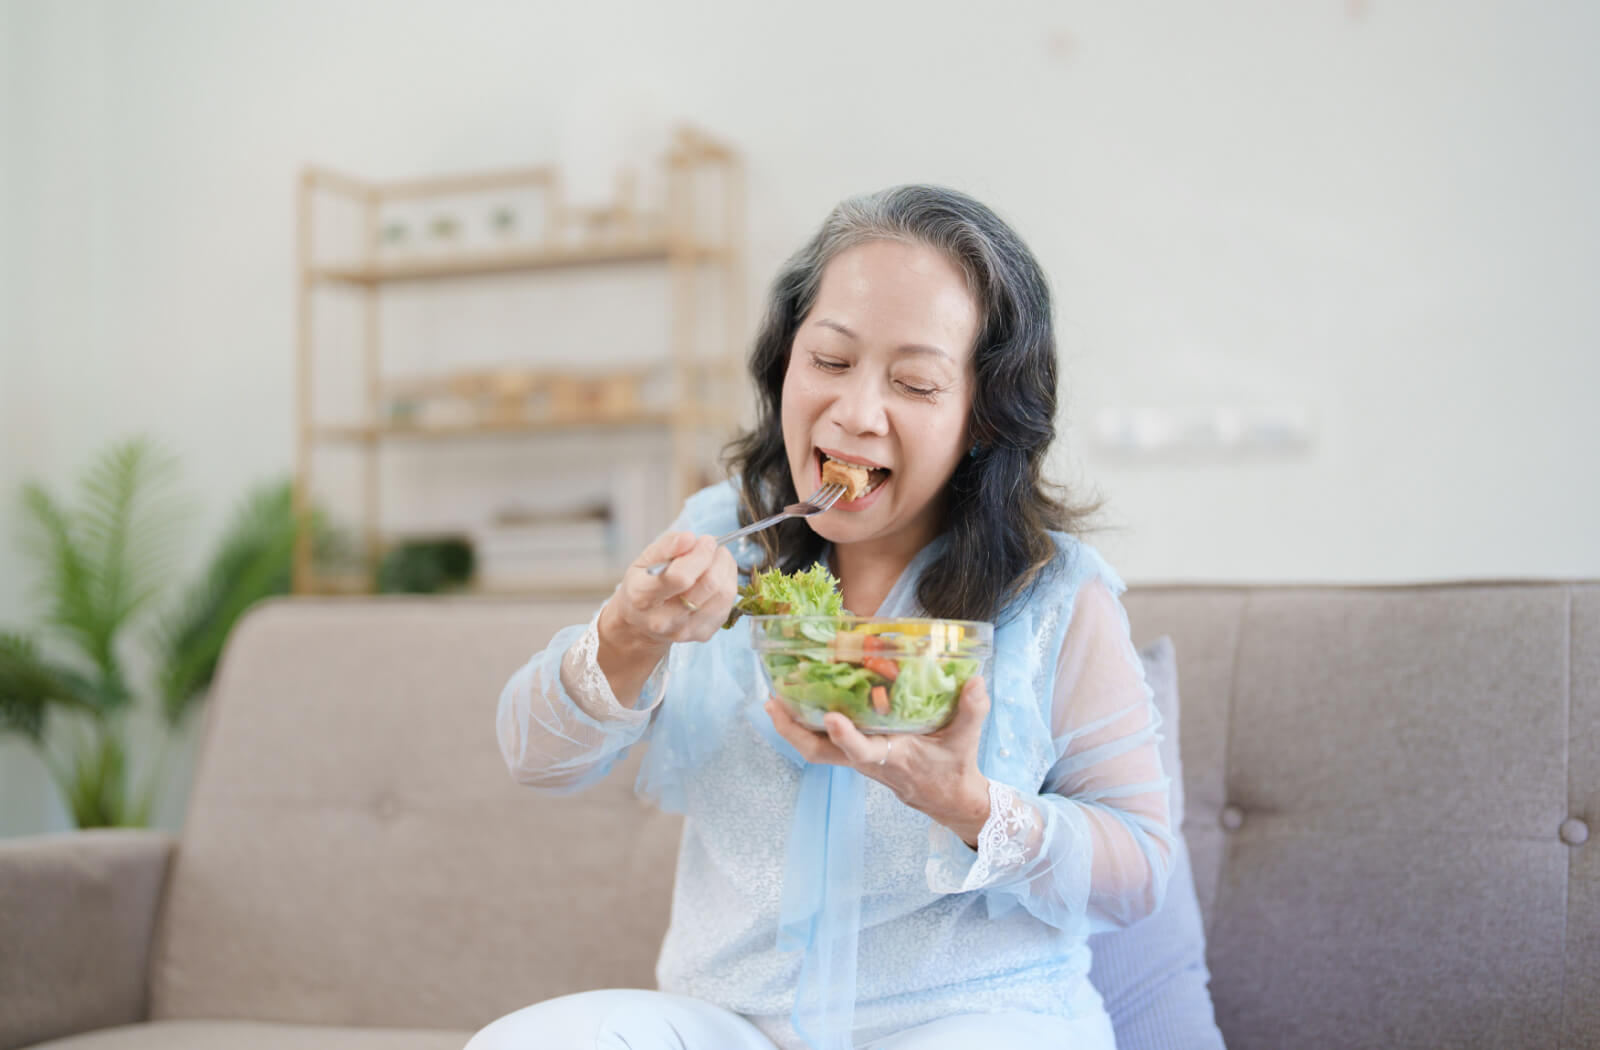 A senior woman eating a bowl of salad in a brightly lit living room.